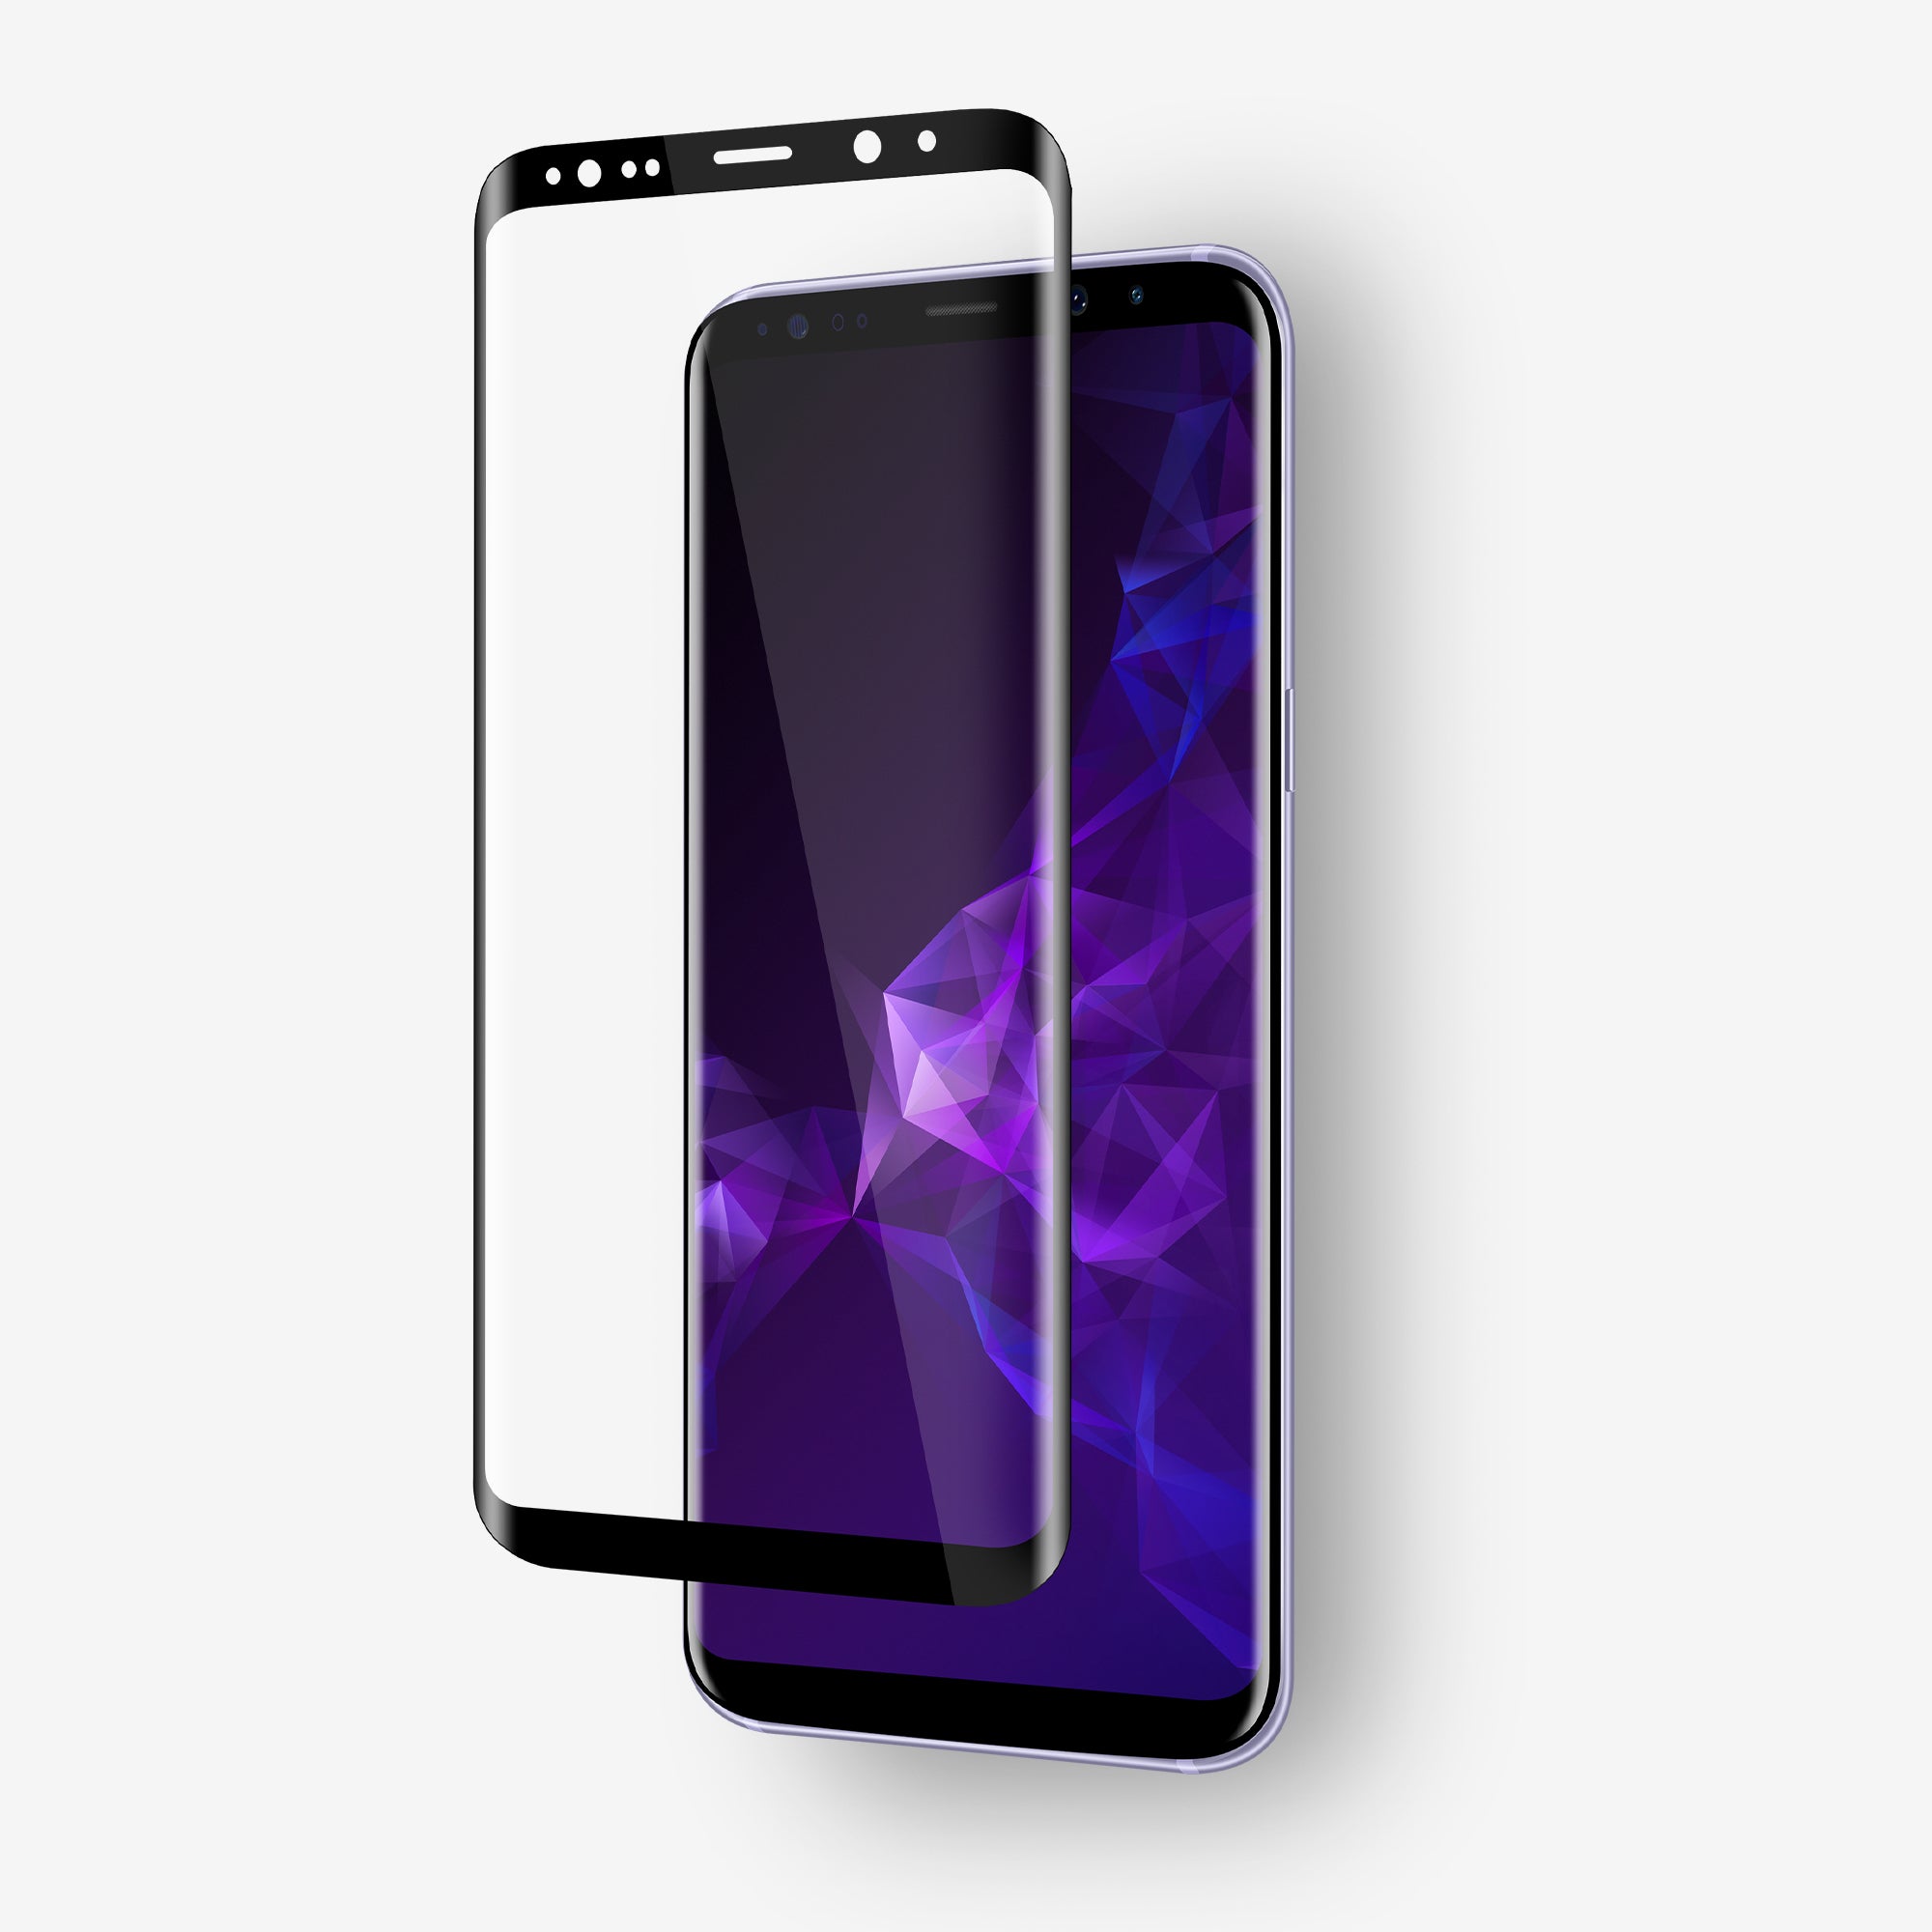 Samsung S9 Plus Tempered Glass Screen Protectors for Sale